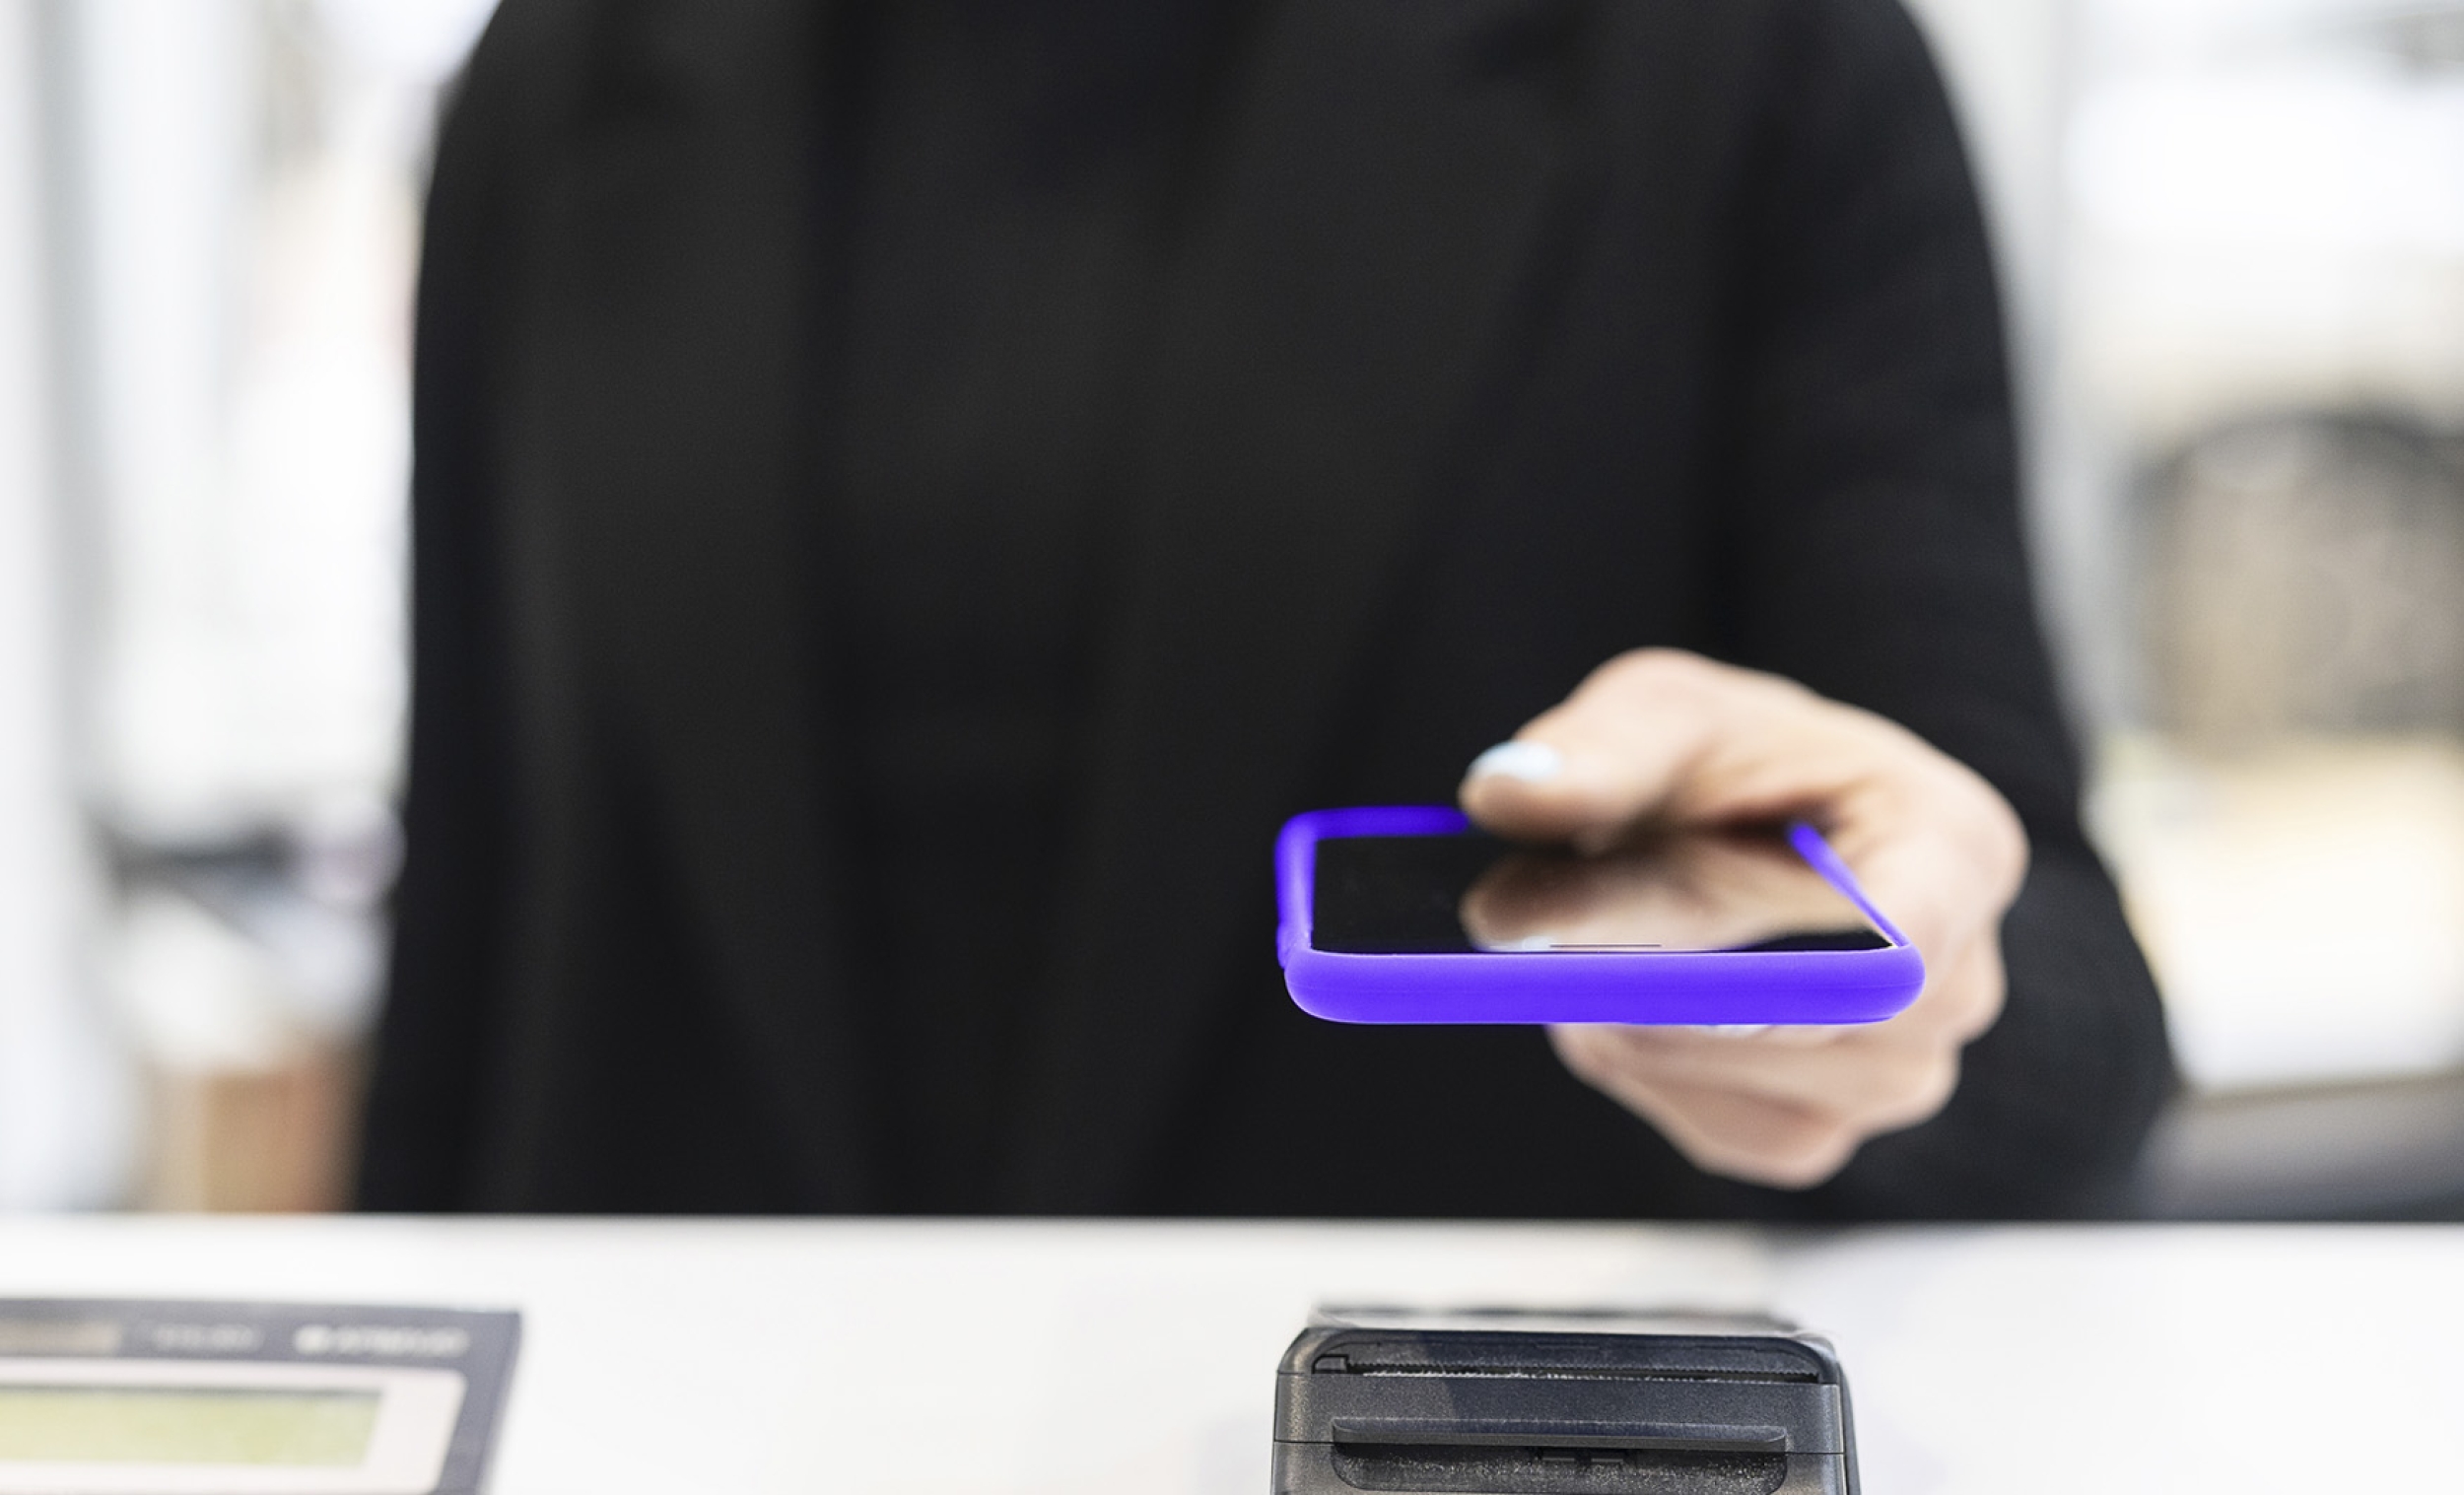 Close-up shot of a woman holding a phone with purple cover to make a payment on a payments device in a store.